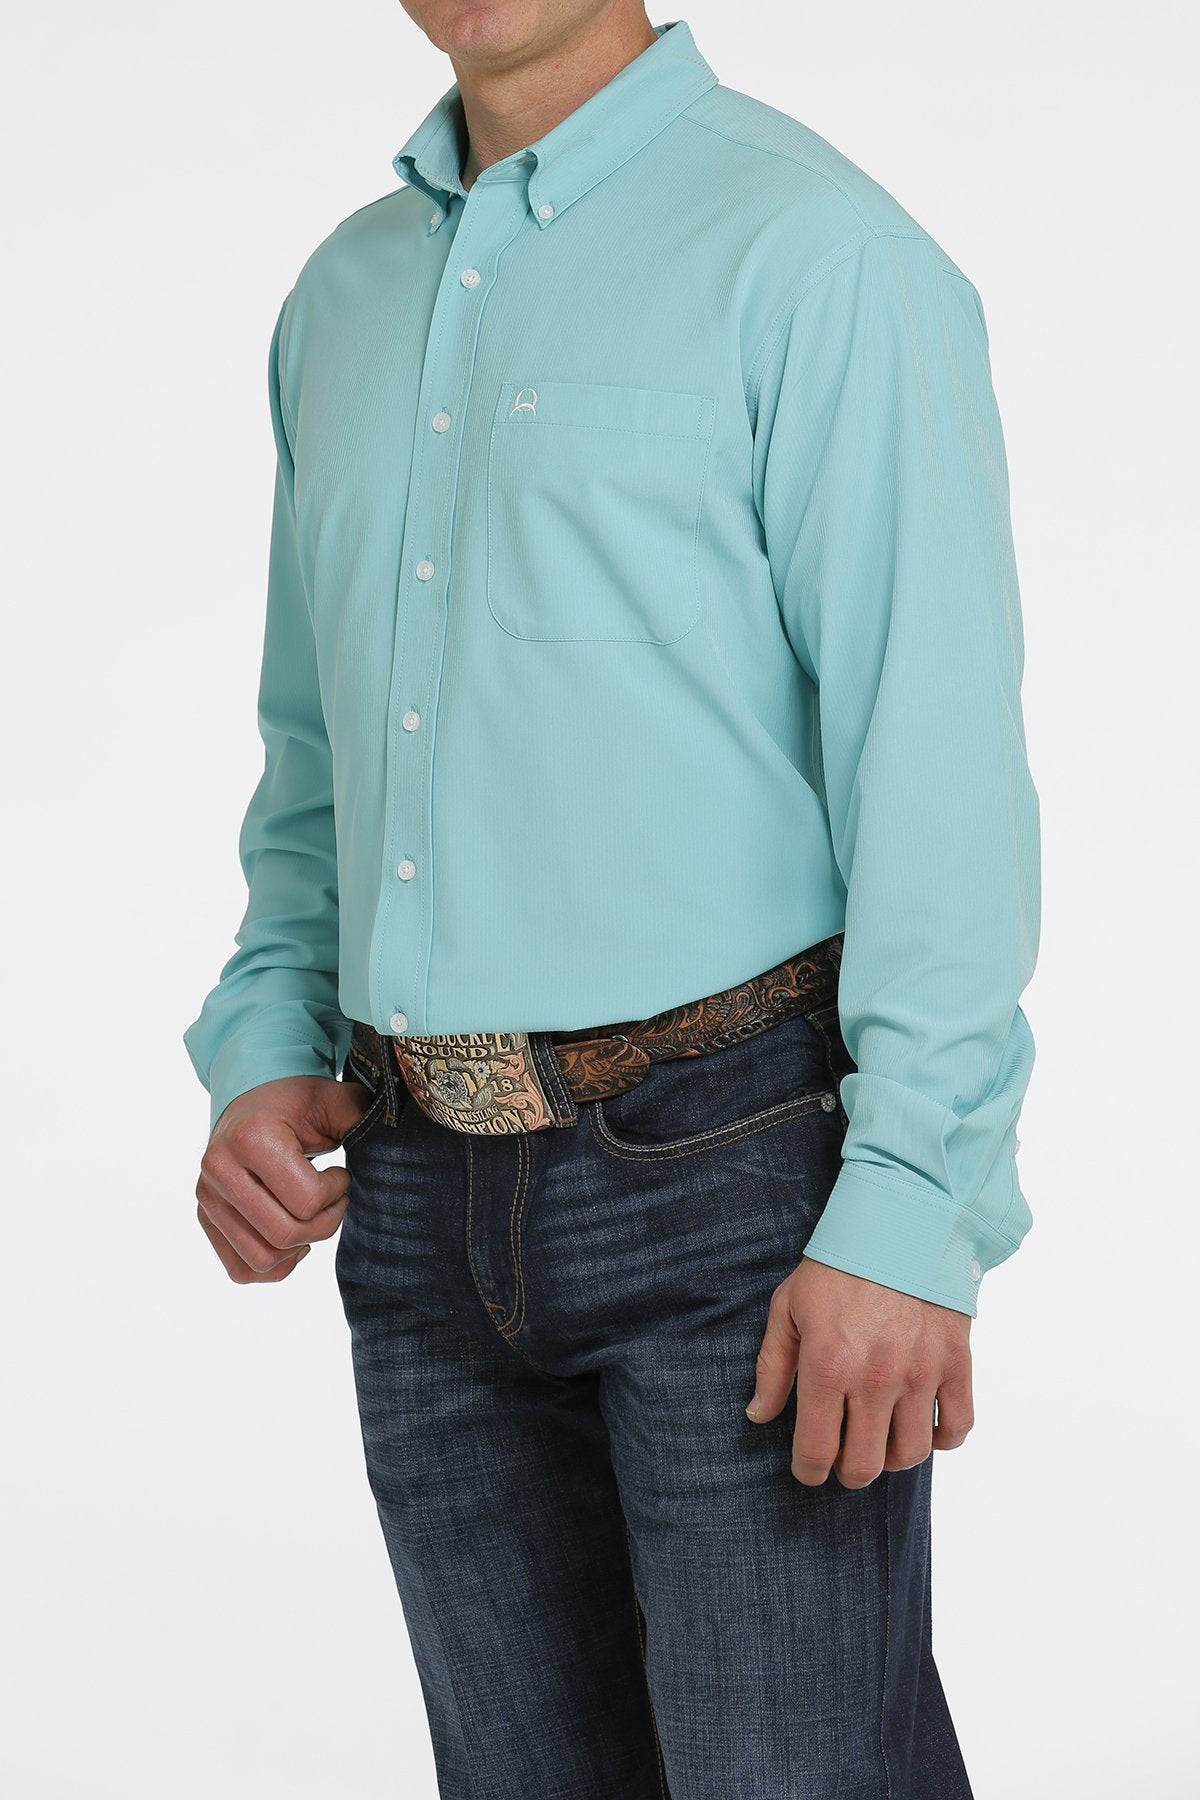 Cinch Mens AreanFlex Button-Down Long Sleeve Solid Print - Turquoise MTW1862014